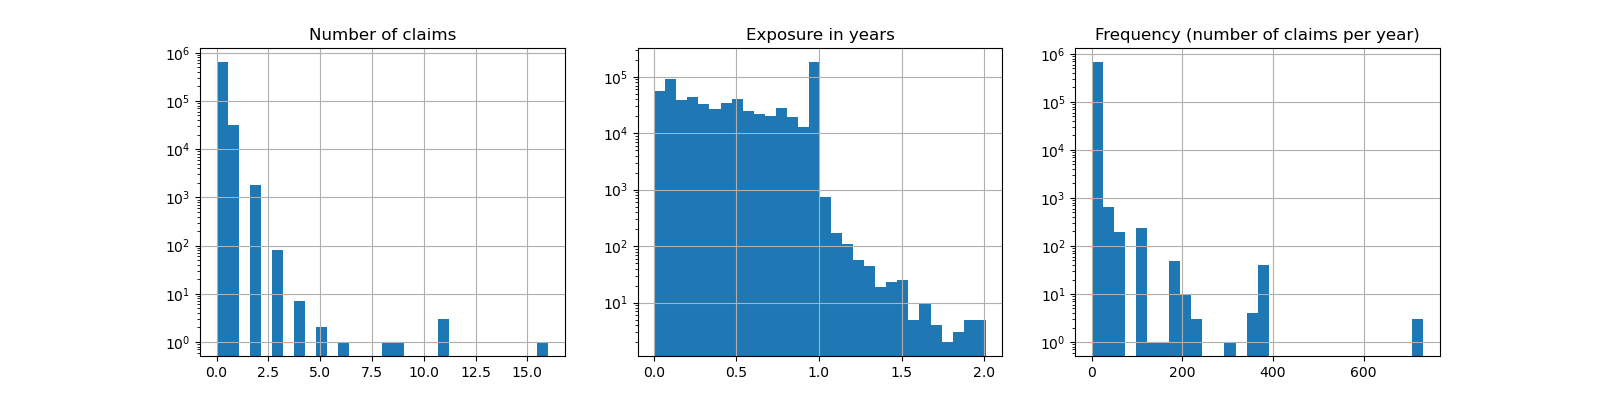 Number of claims, Exposure in years, Frequency (number of claims per year)